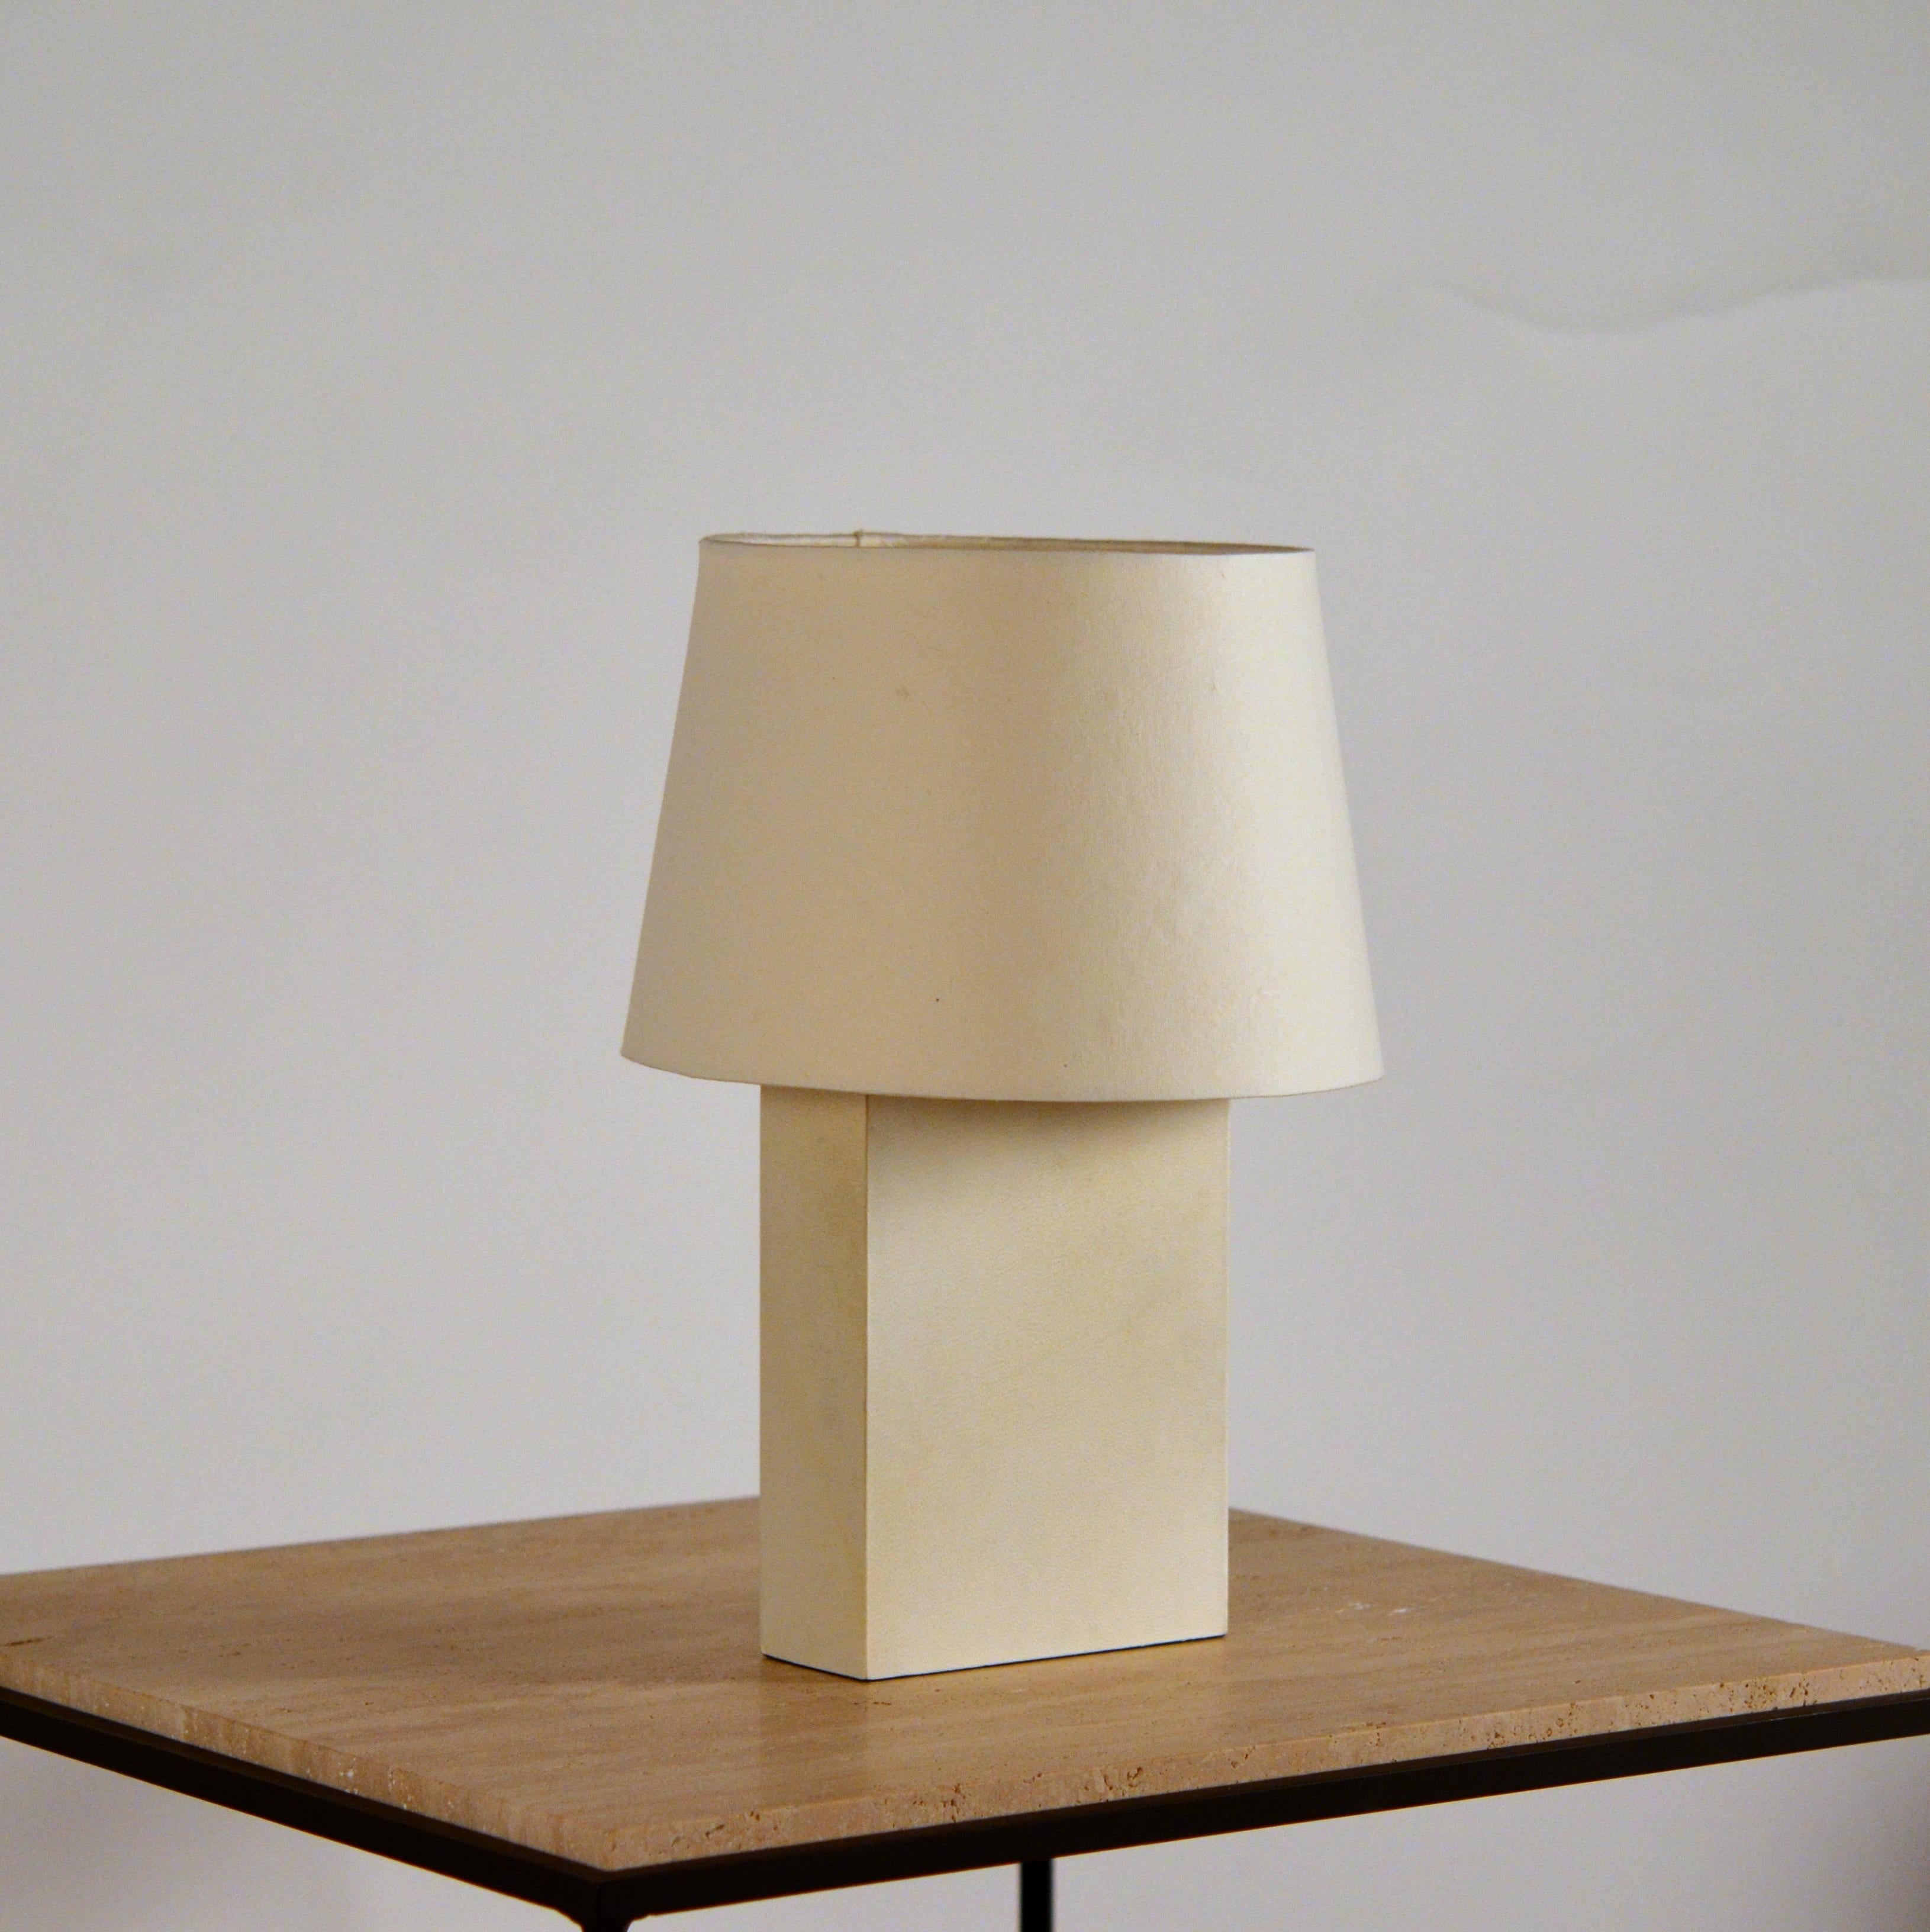 Pair of 'Bloc' parchment clad table lamps with matching parchment paper shades by Design Frères.